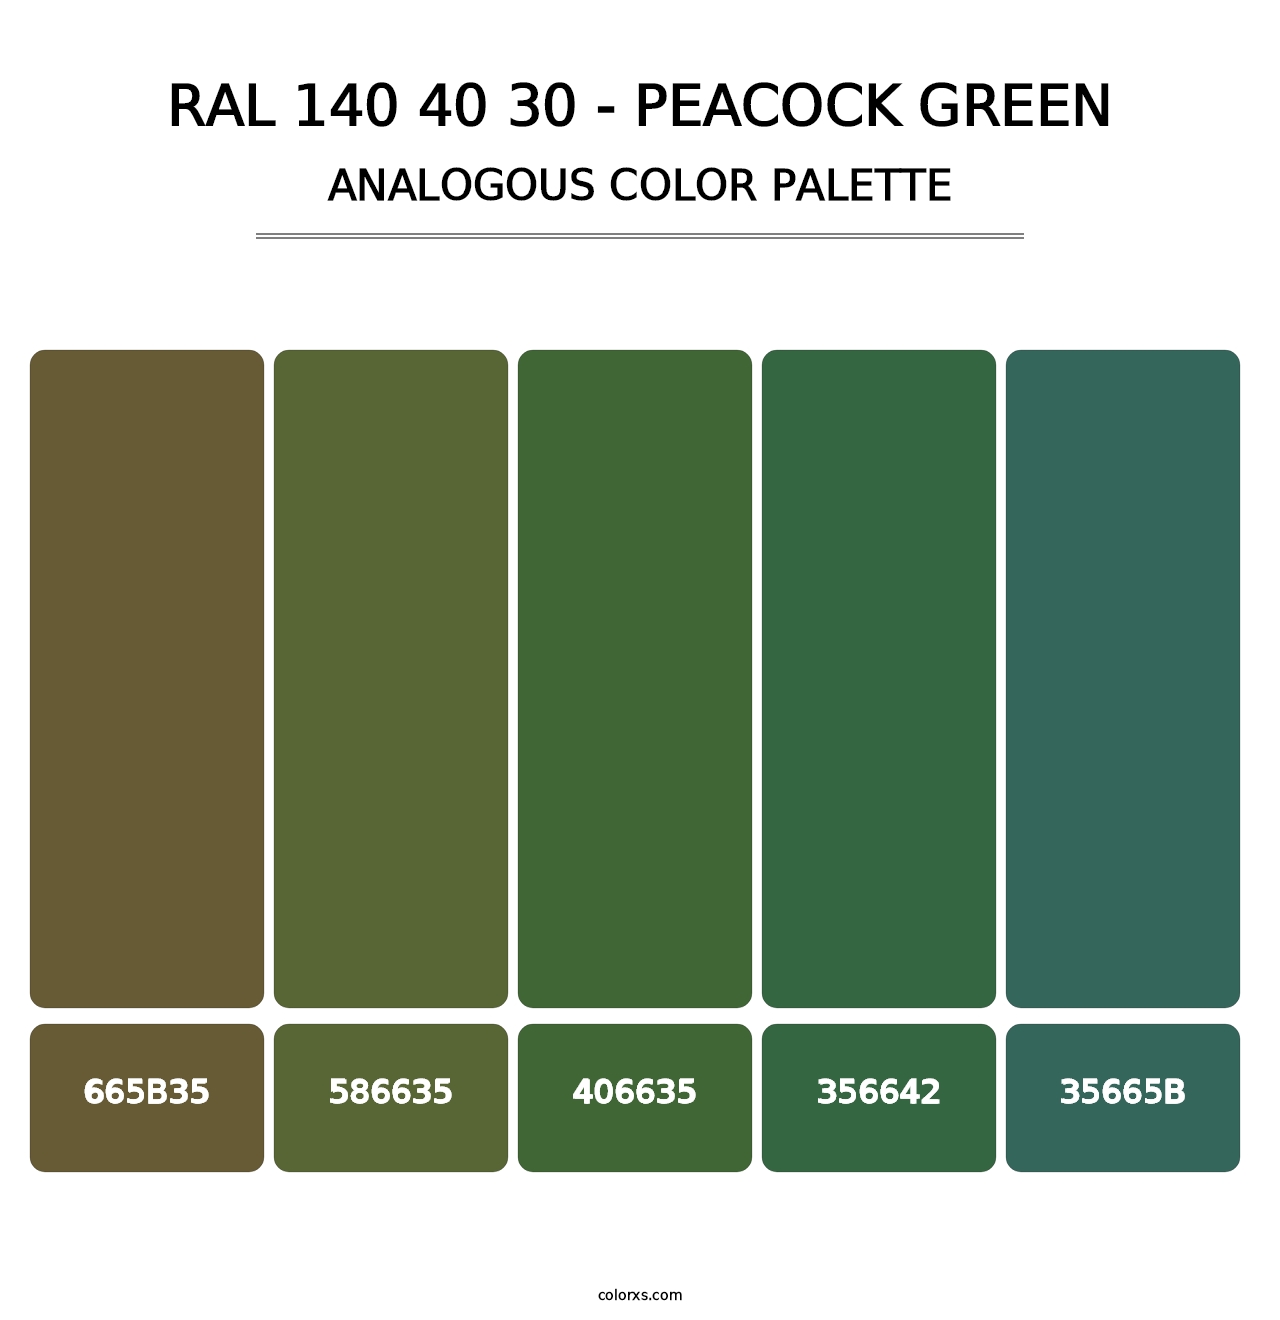 RAL 140 40 30 - Peacock Green - Analogous Color Palette